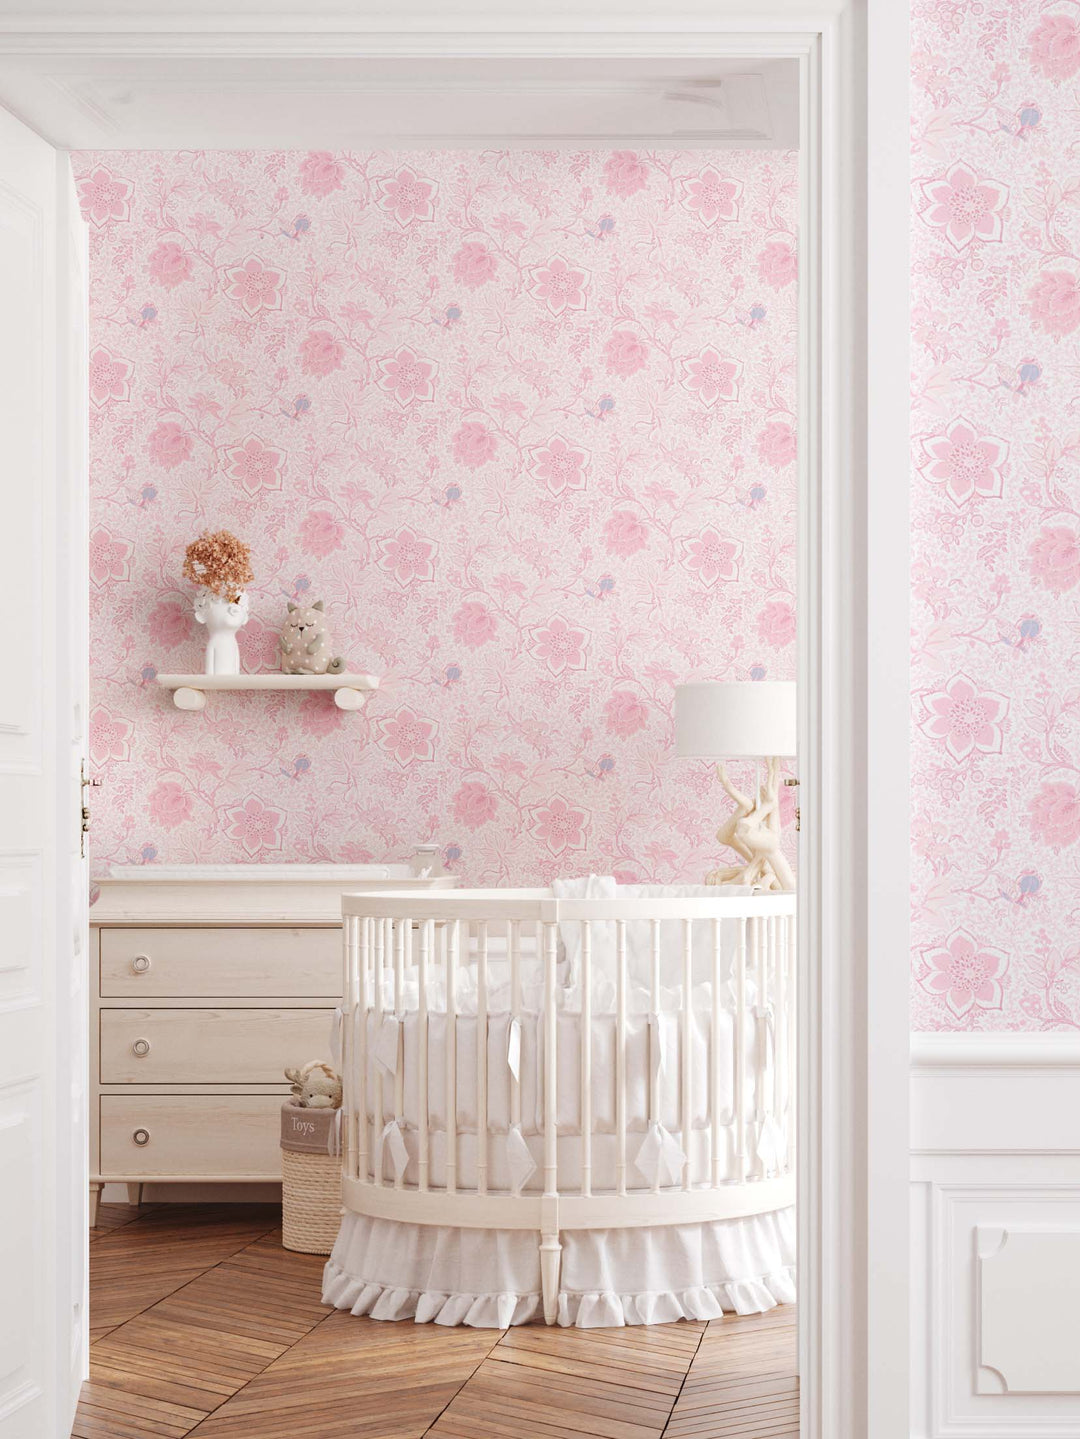 Baby's nursery with a pretty pink floral wallpaper and white nursery furniture. Wallpaper by Milola Design